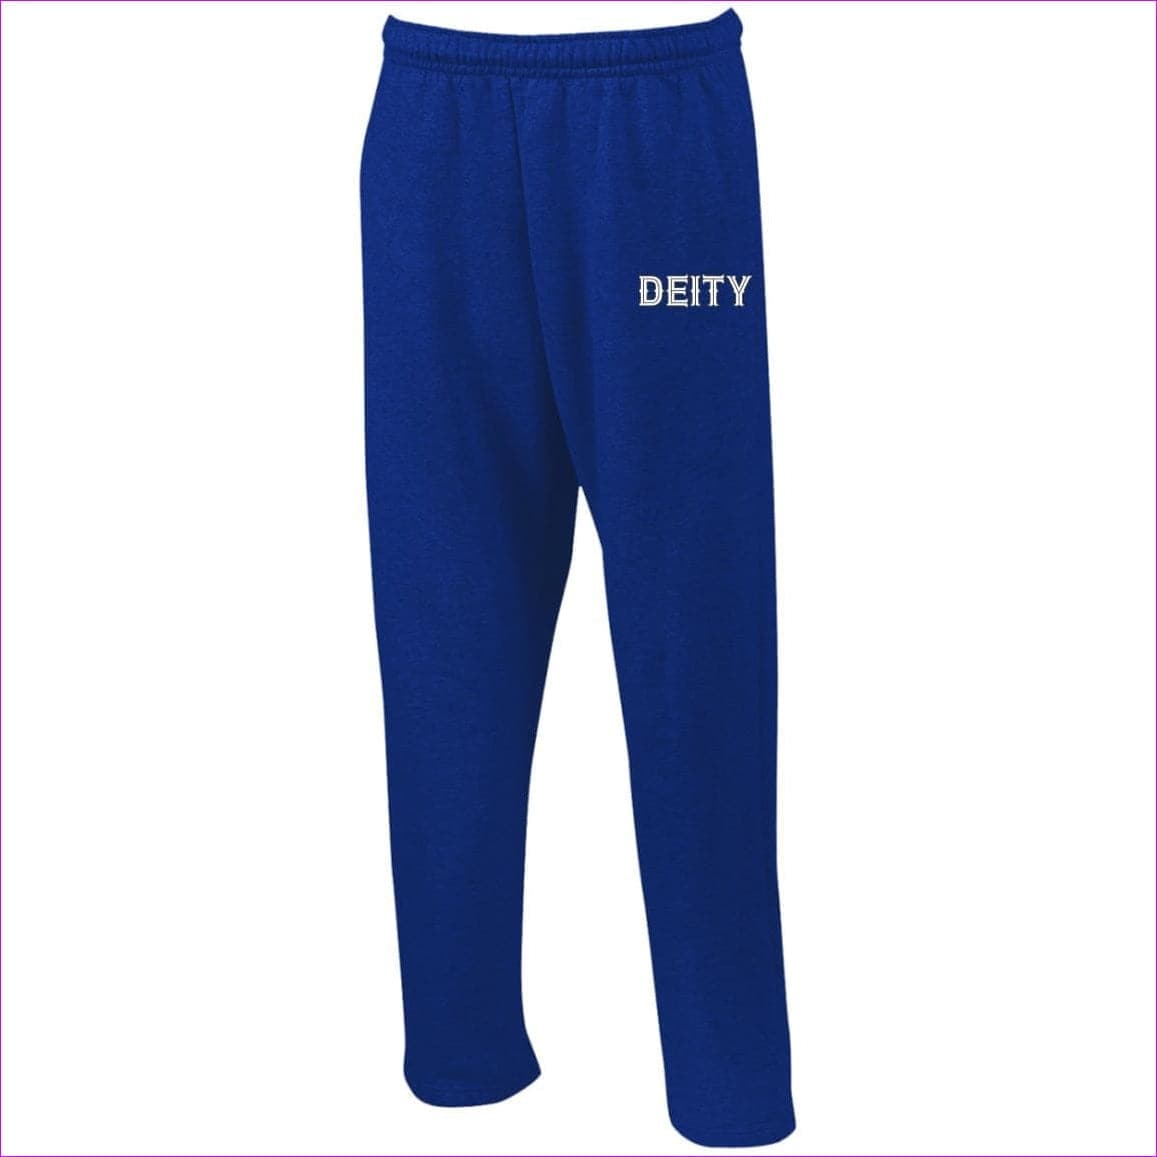 Royal - Deity Open Bottom Sweatpants with Pockets - unisex sweatpants at TFC&H Co.